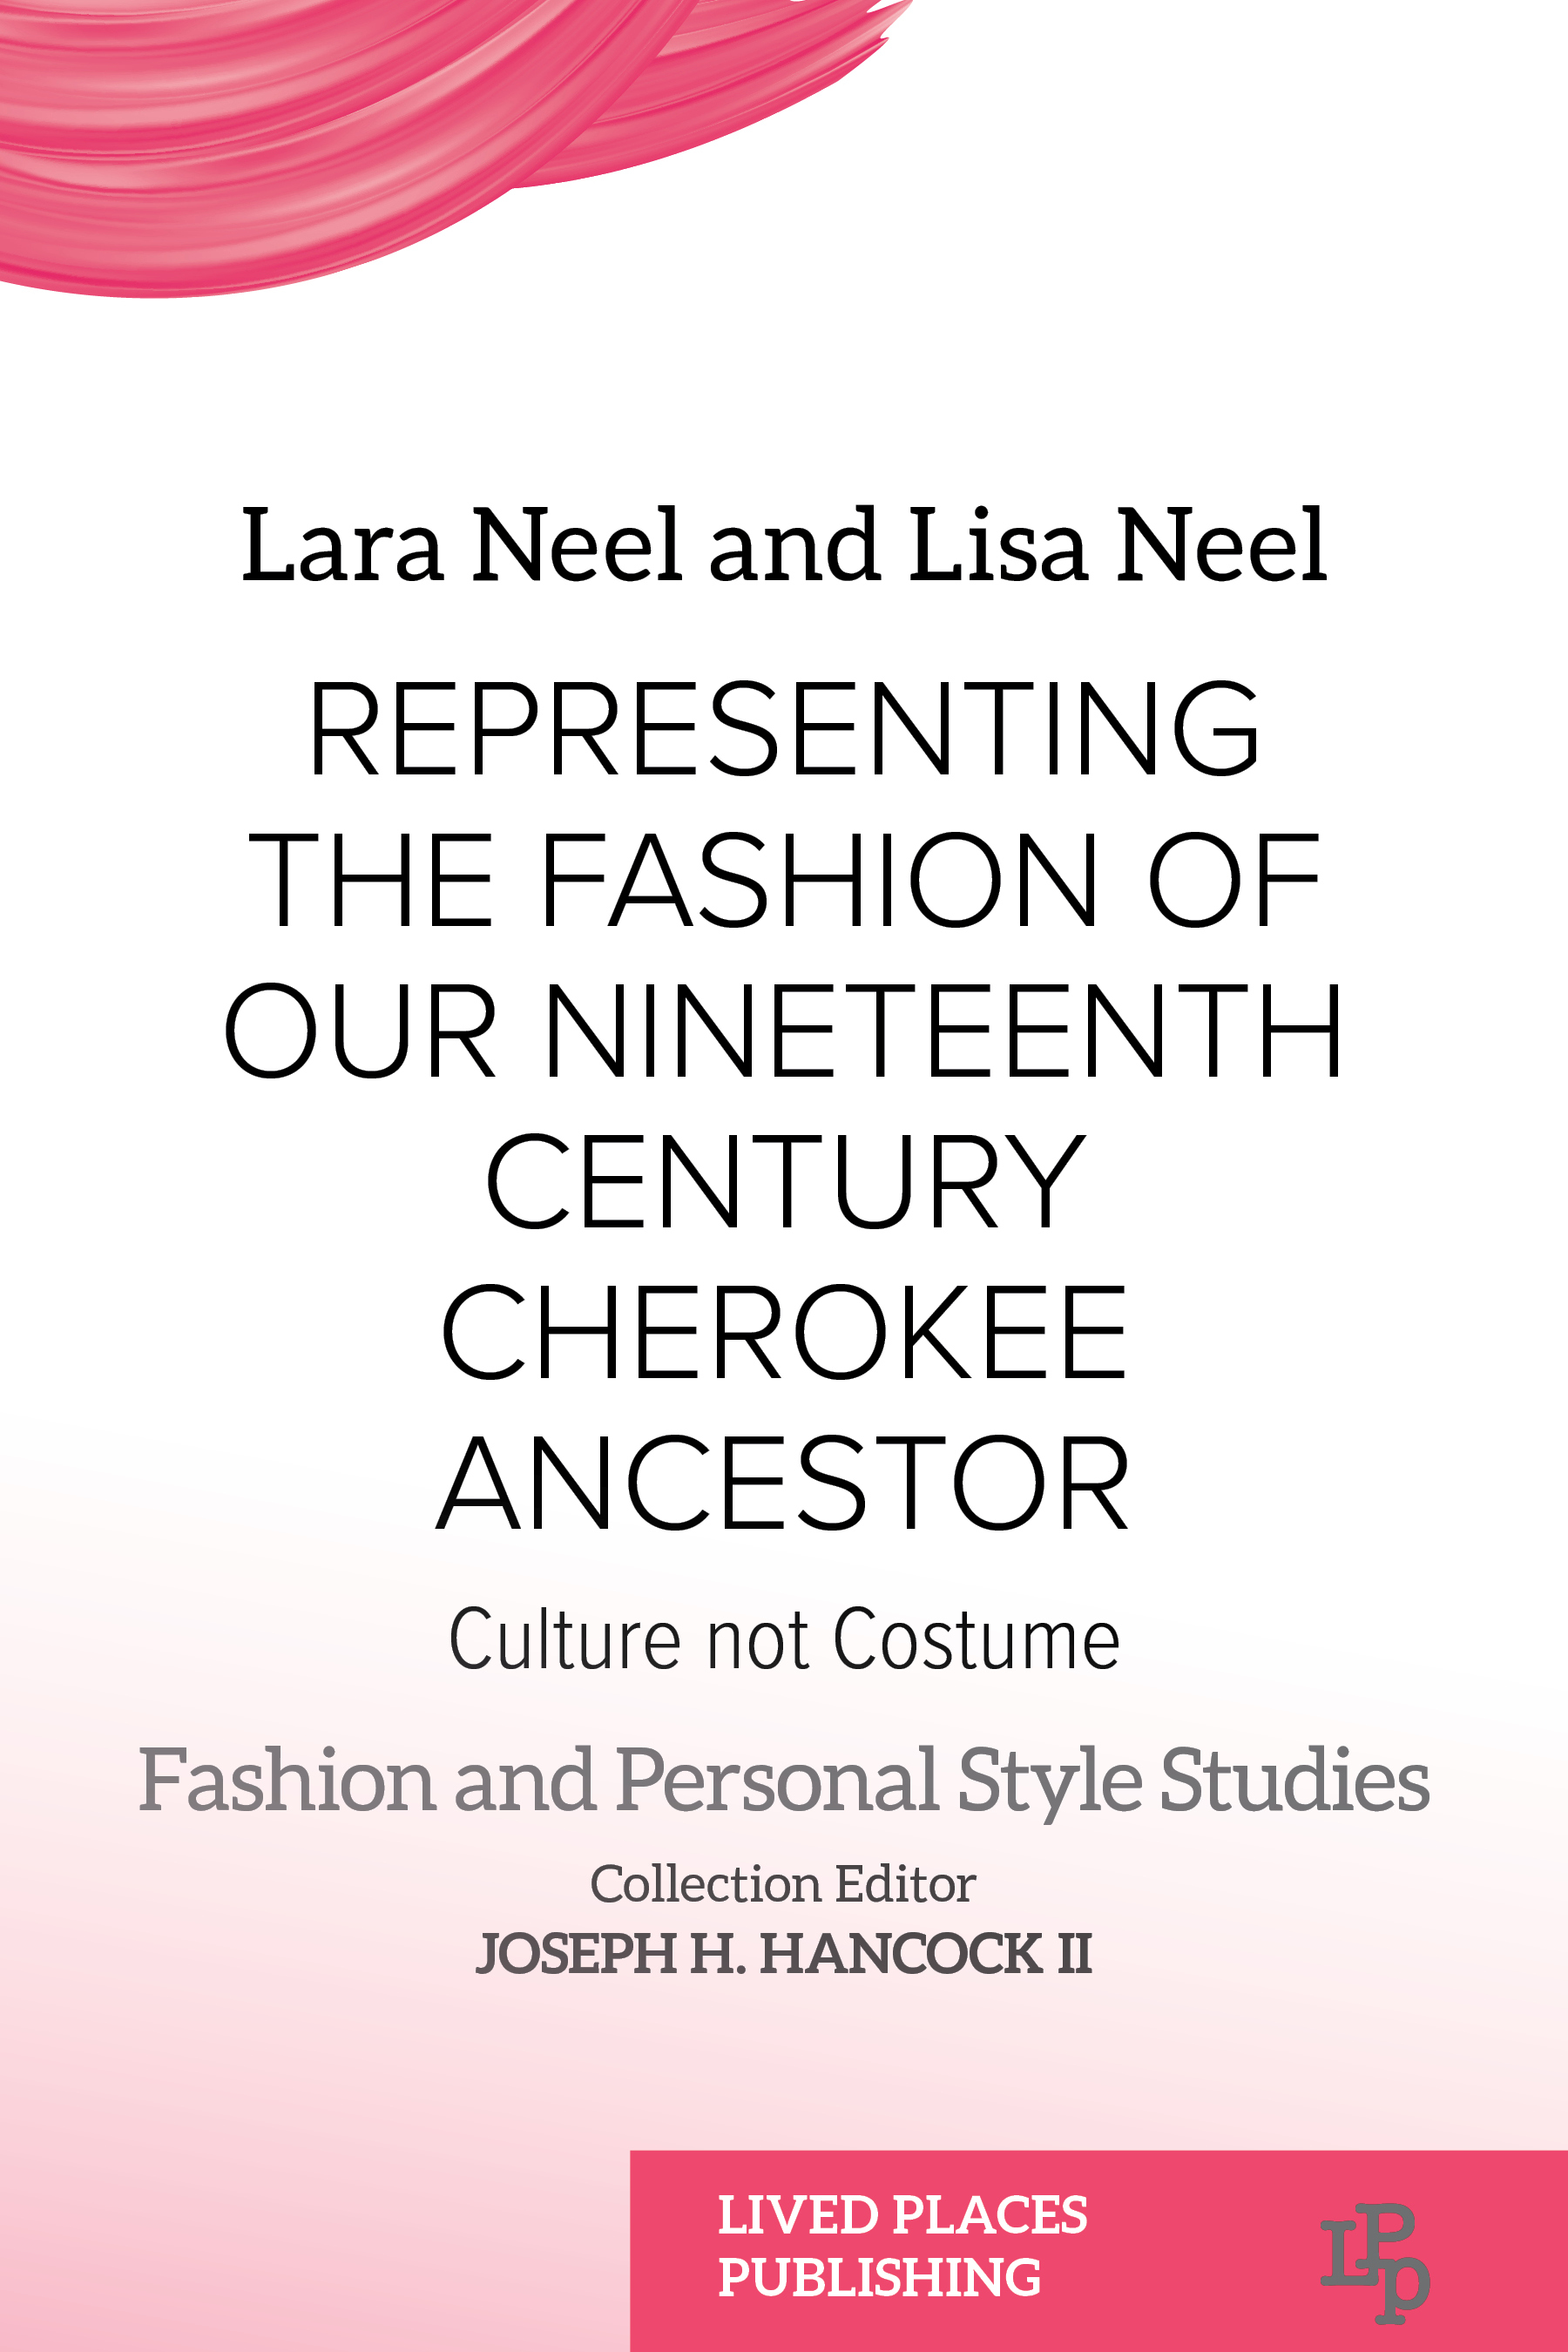 Representing the Fashion of our Nineteenth Century Cherokee Ancestor